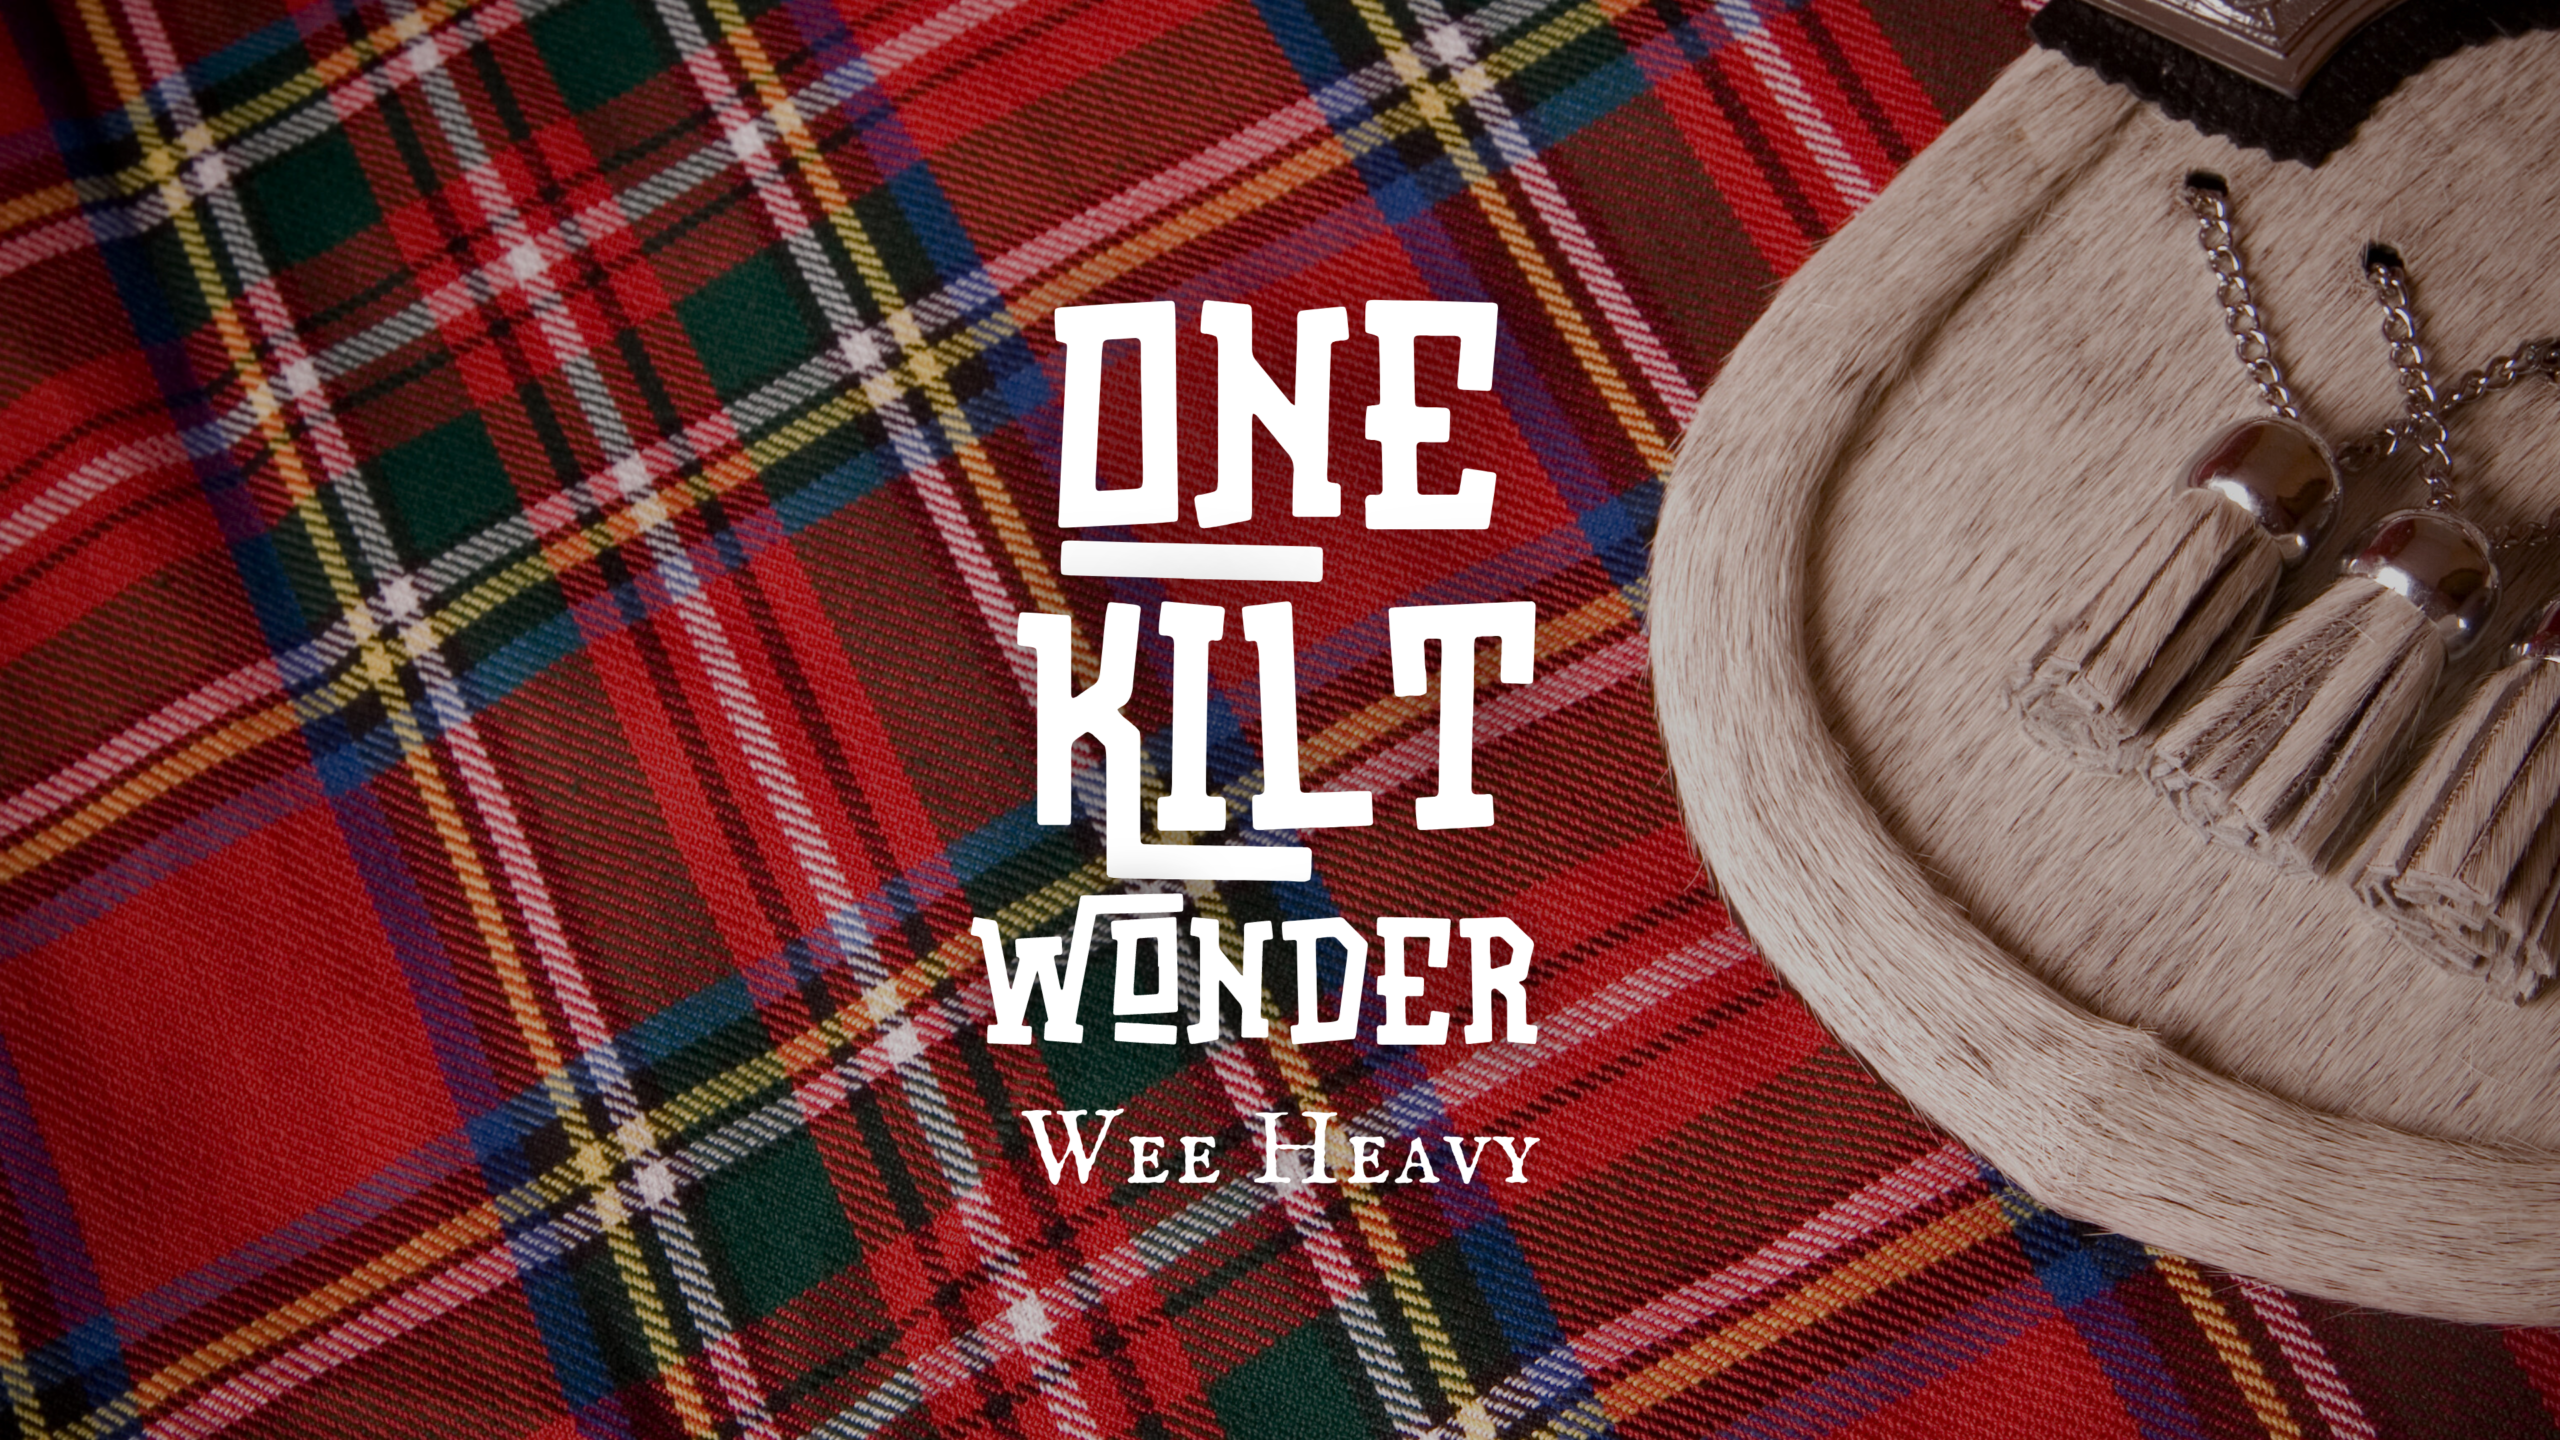 One Kilt Wonder Wee Heavy Release at On Rotation